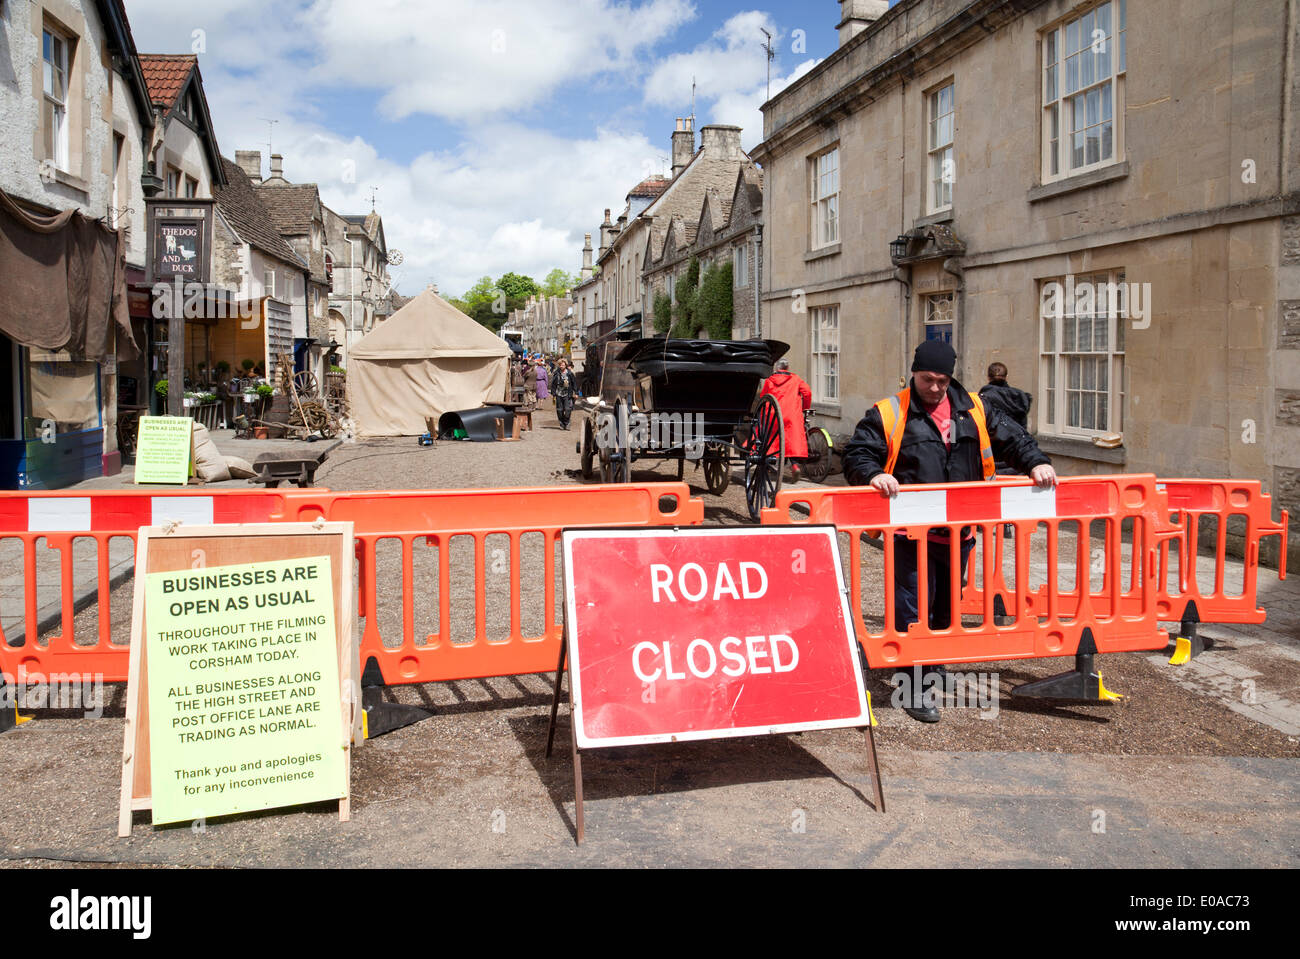 Corsham, Wiltshire, UK. 7th May, 2014. The High Street of Corsham is turned into 18th Century Cornwall for the filming of the new BBC period drama Poldark. Stock Photo